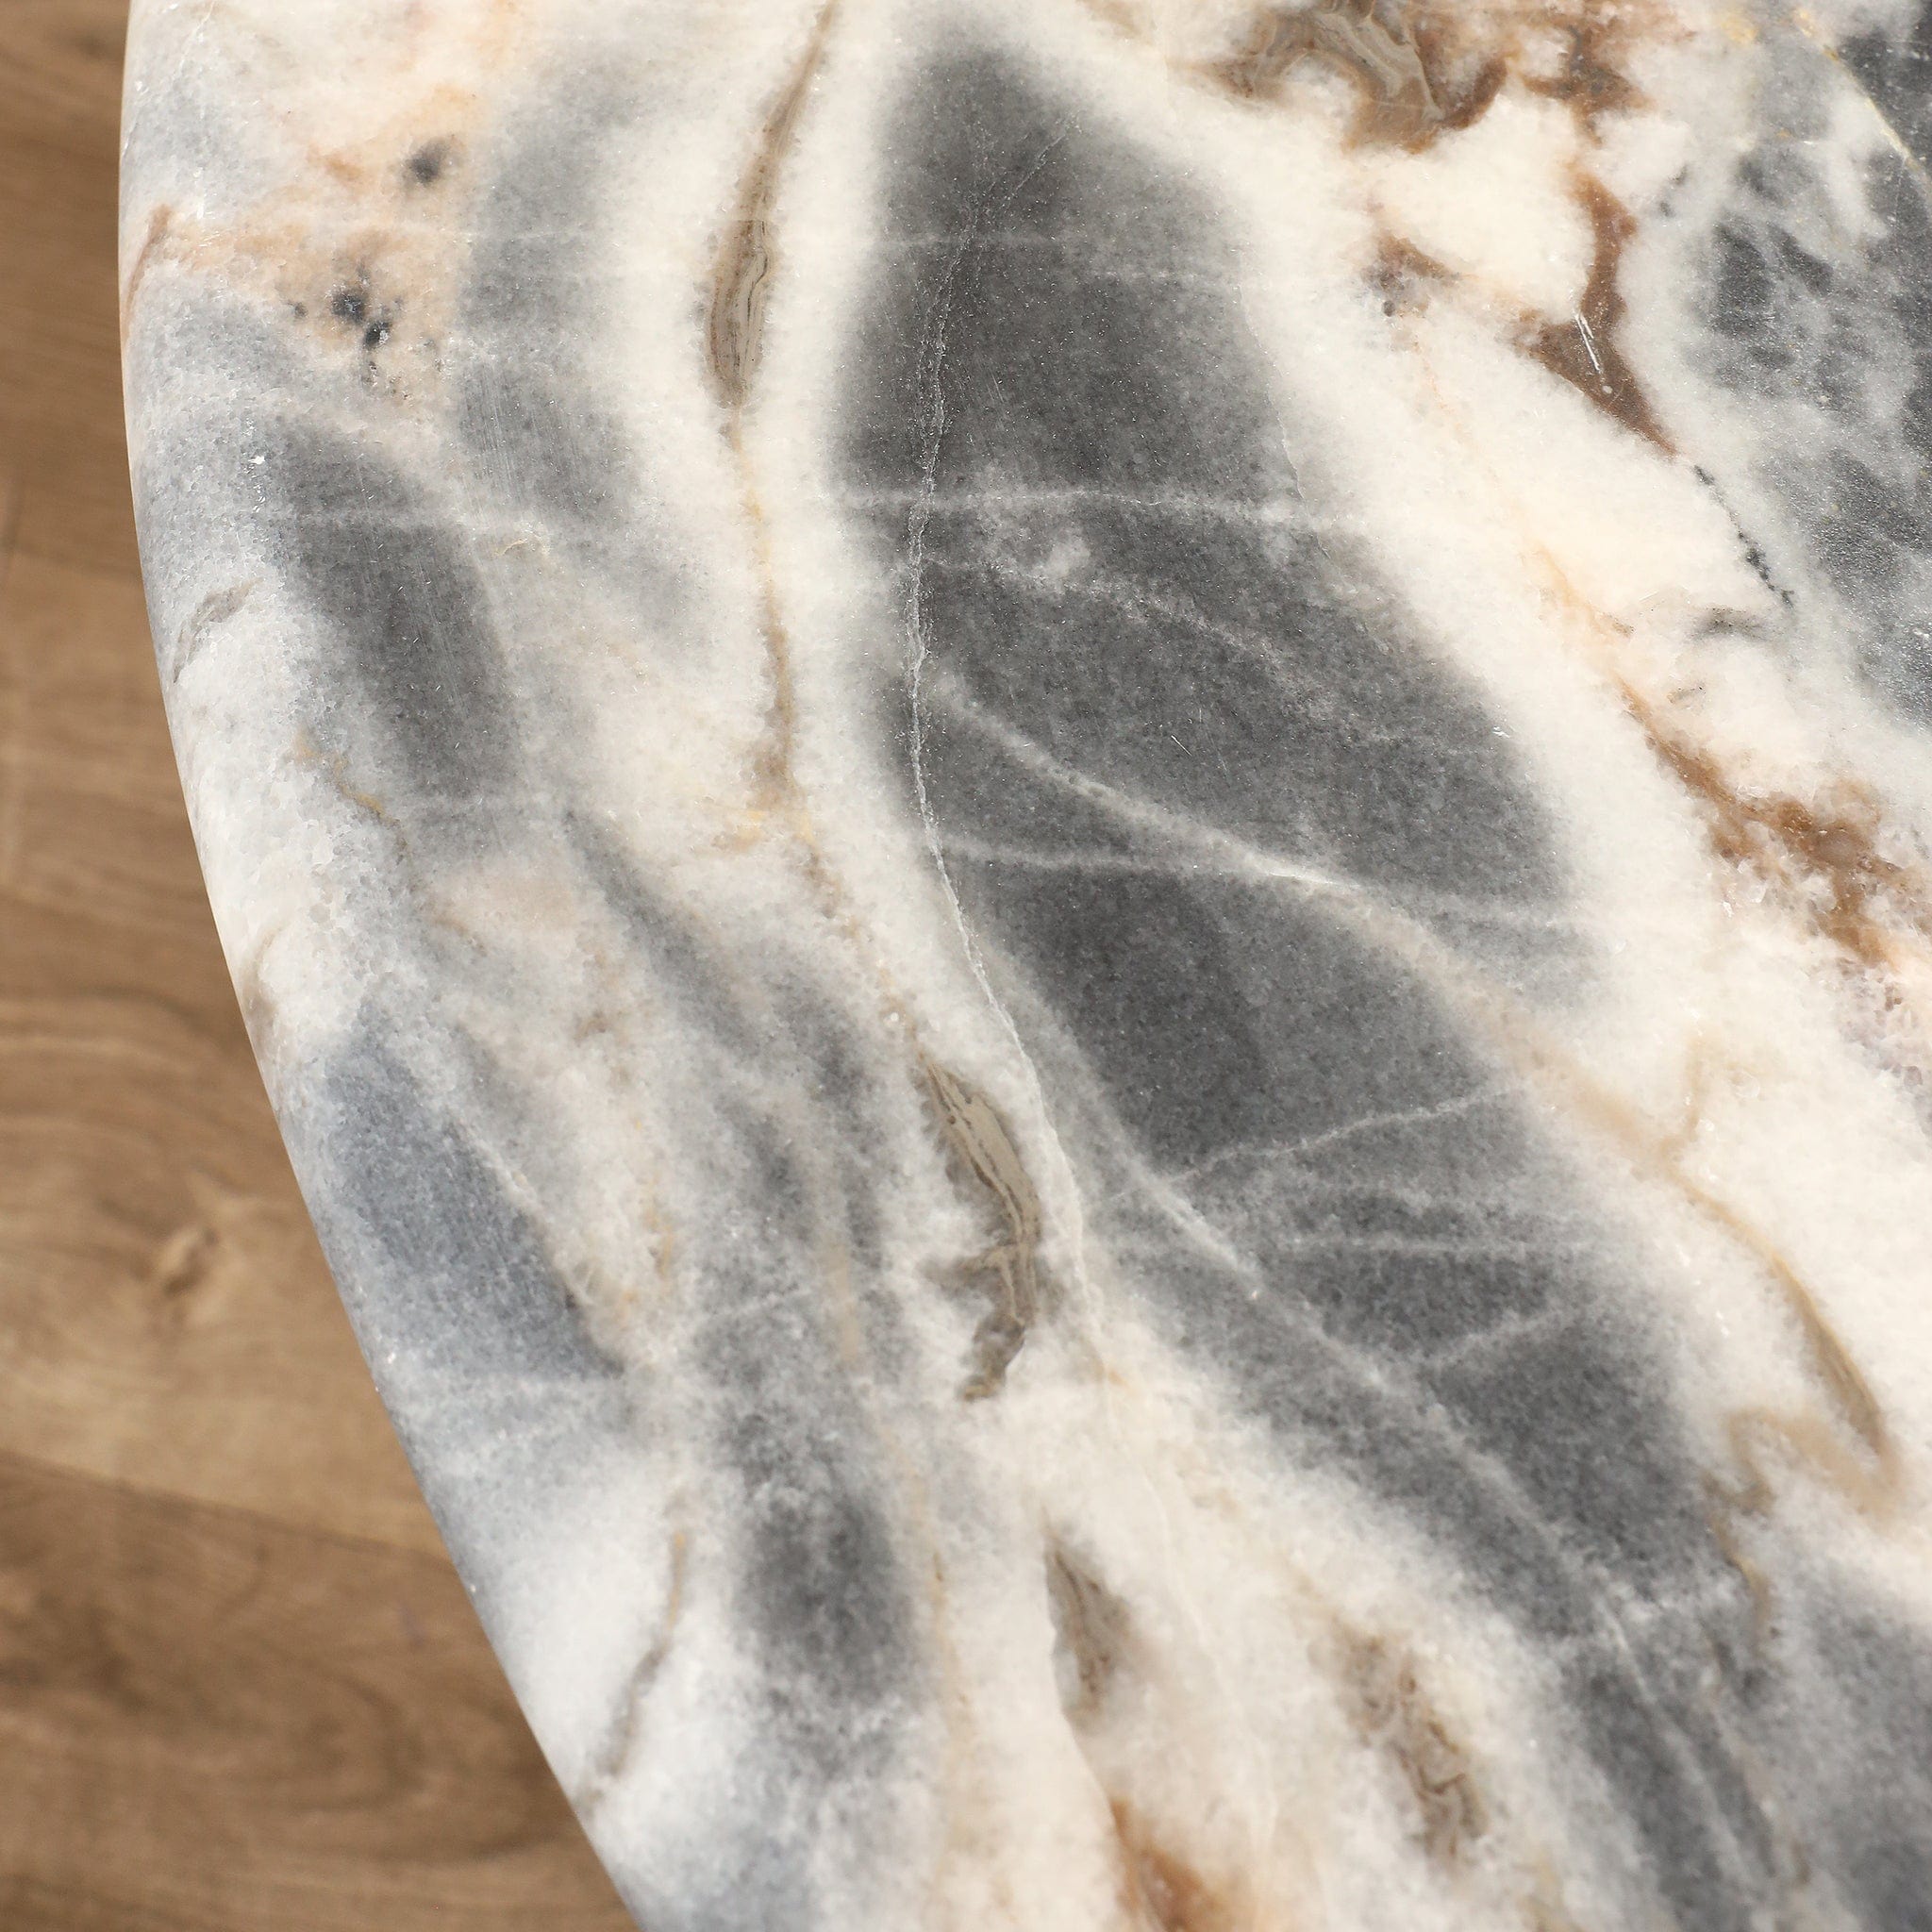 Silas <br>Marble Coffee Table - Bloomr